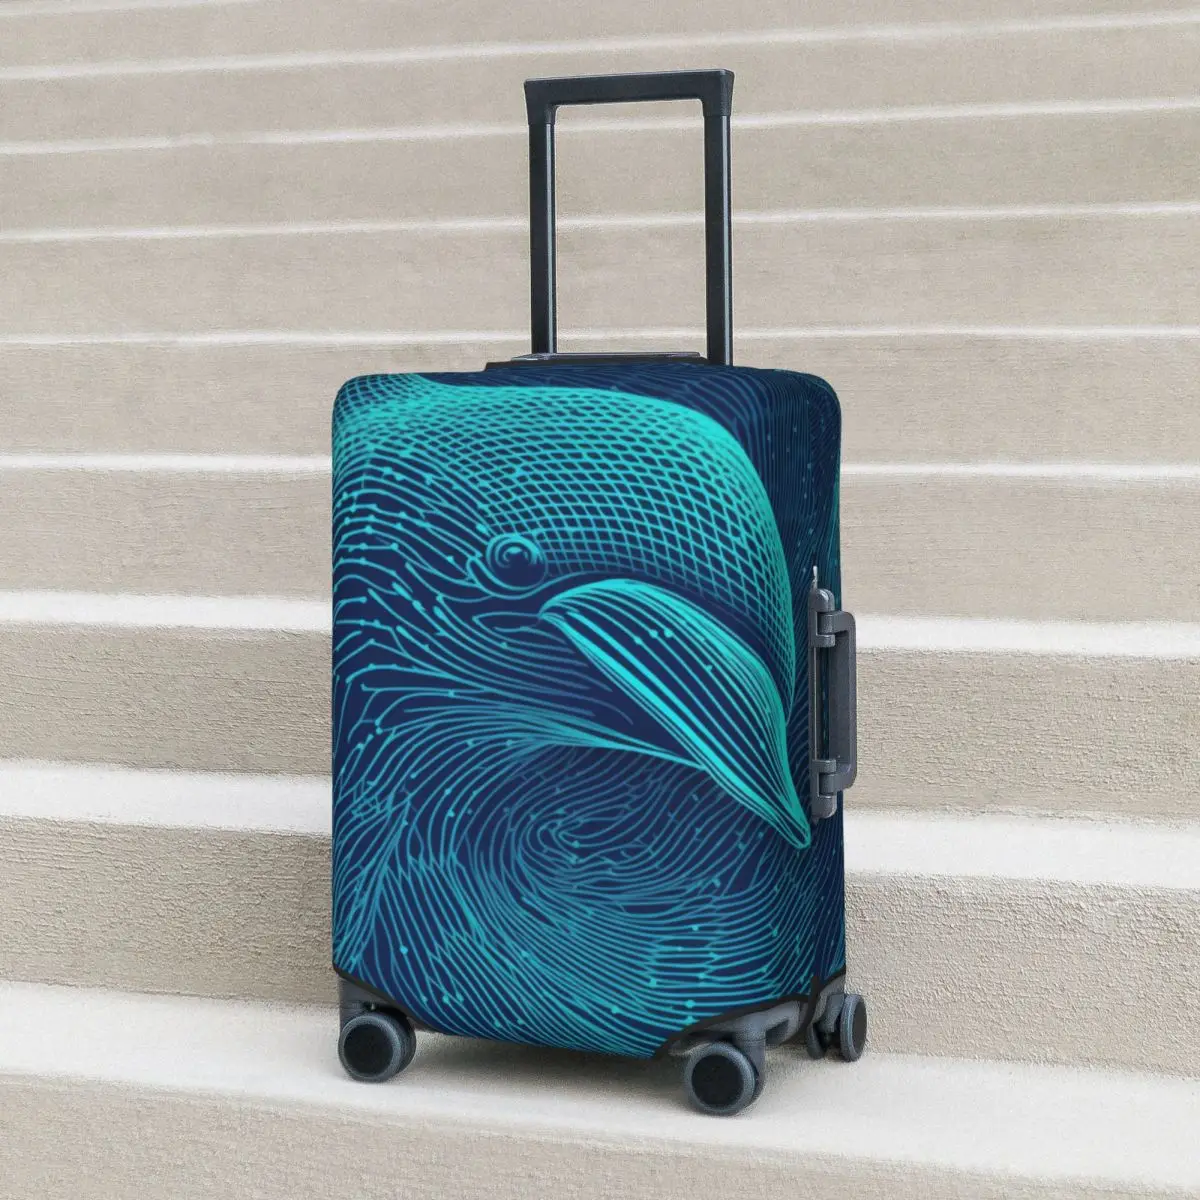 

Dolphin Suitcase Cover Psychedelic Lines Portraits Cruise Trip Flight Practical Luggage Case Protection